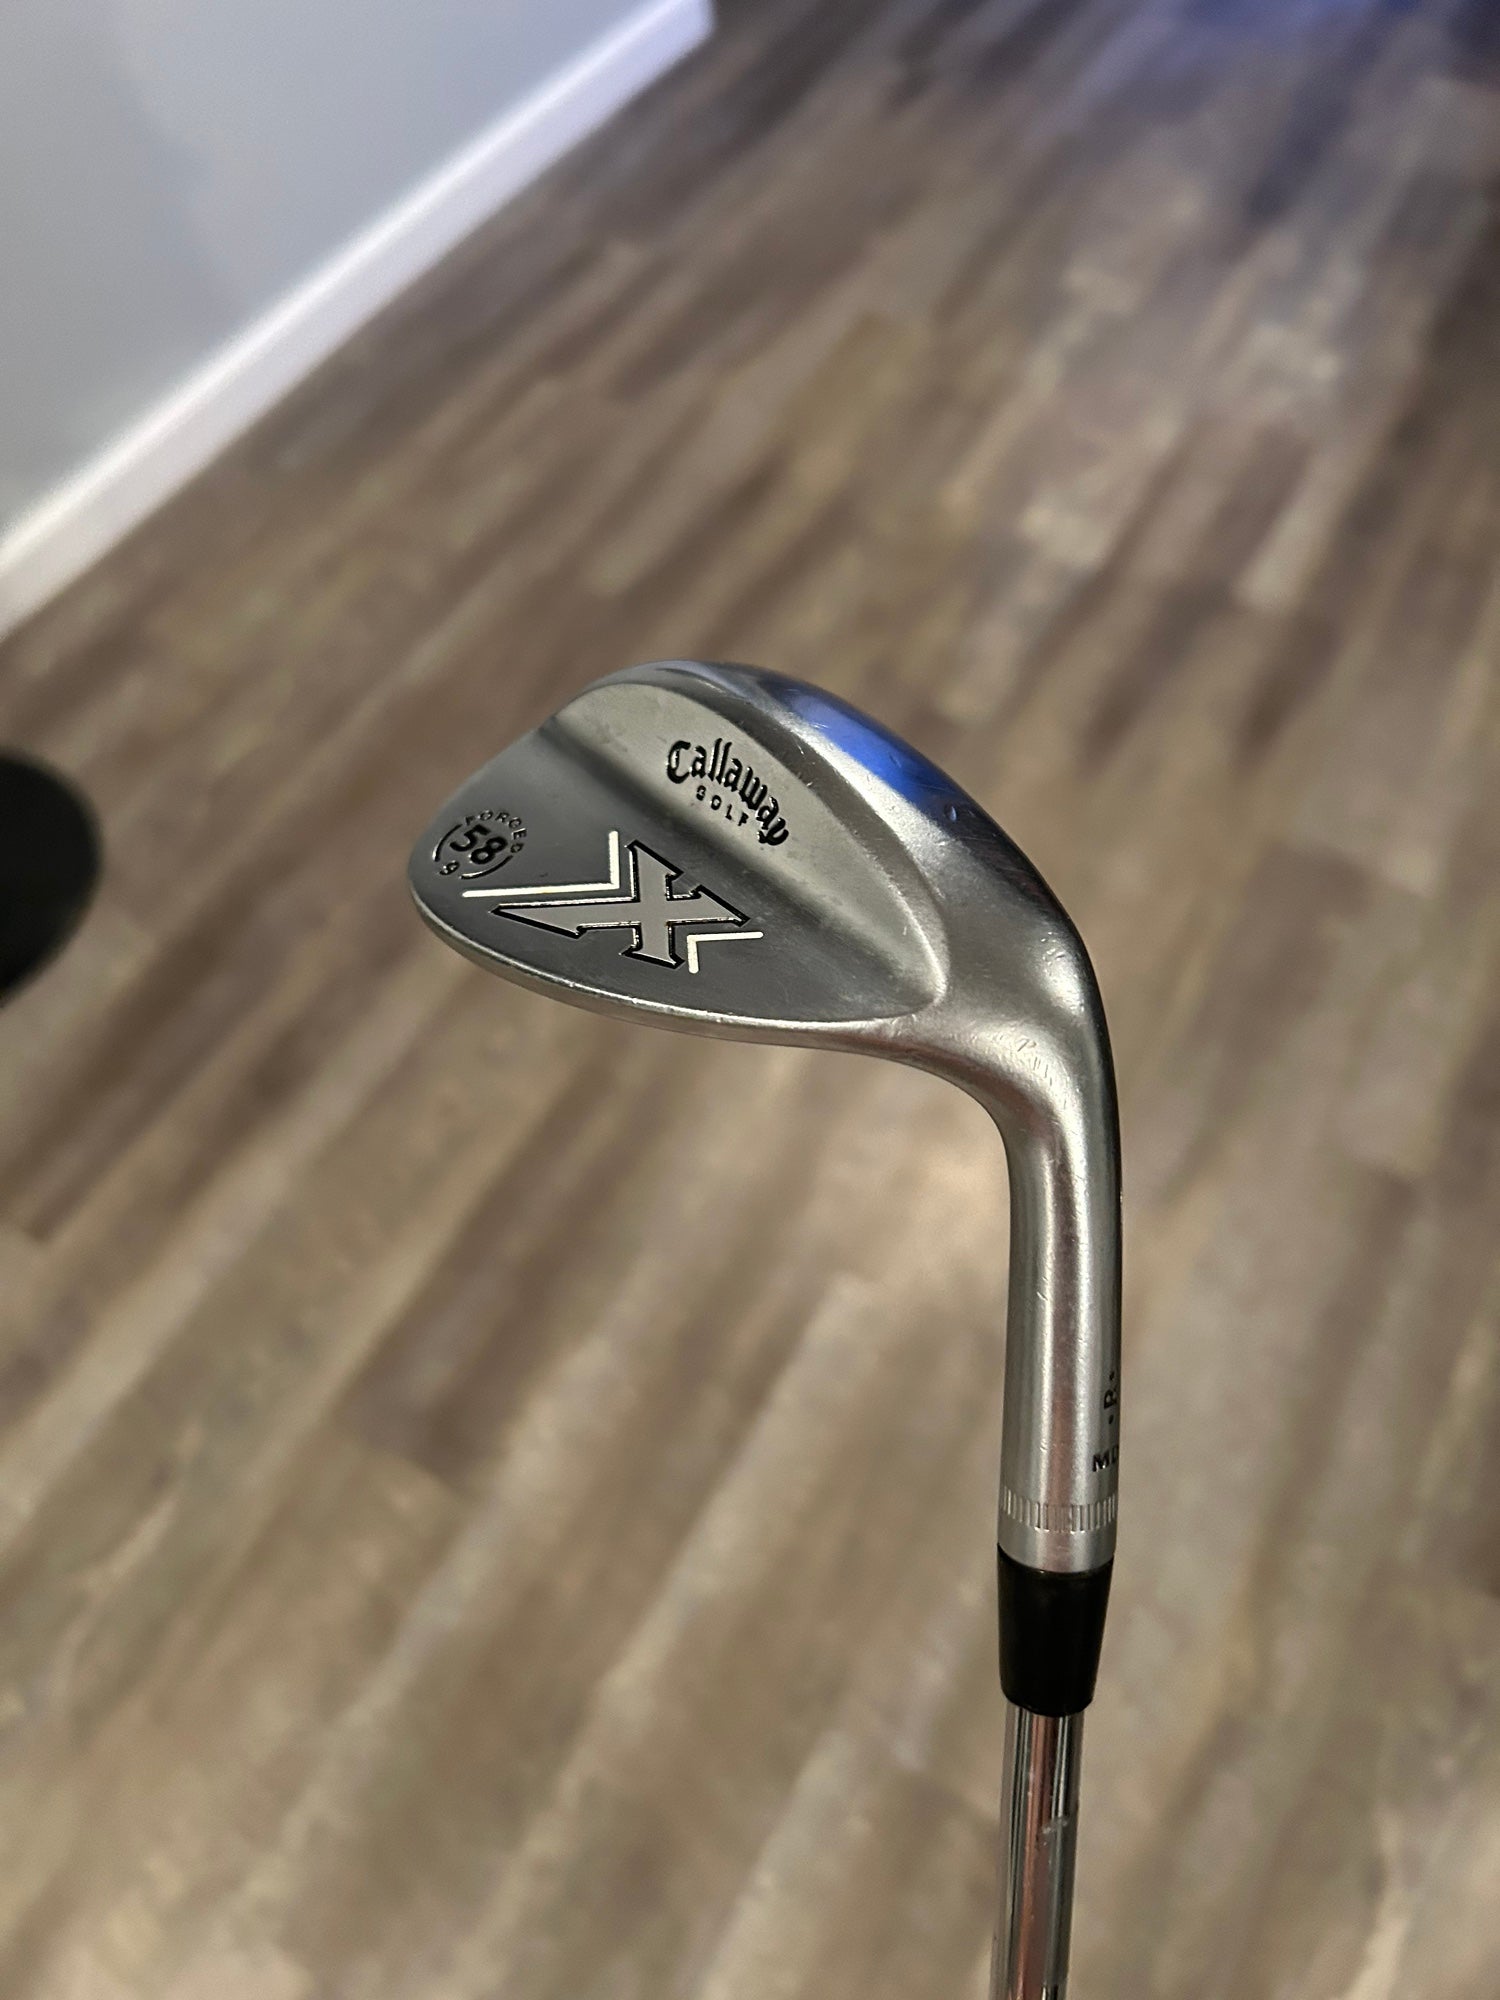 Callaway x forged 58 degree wedge | SidelineSwap